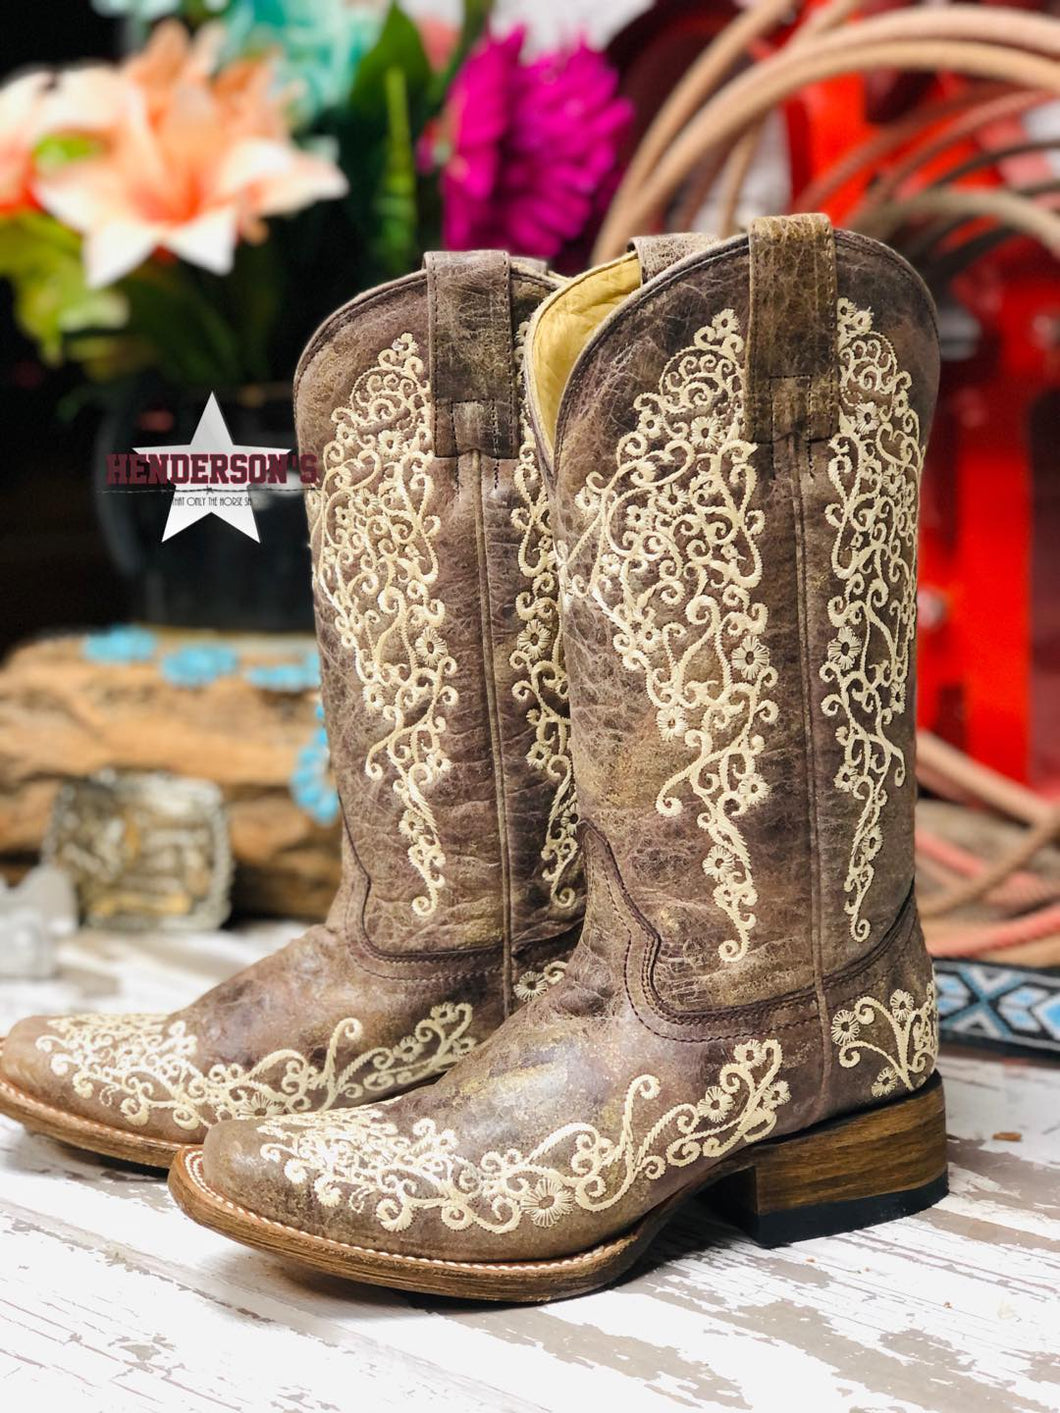 Brown Crater Embroidery Boots - Henderson's Western Store